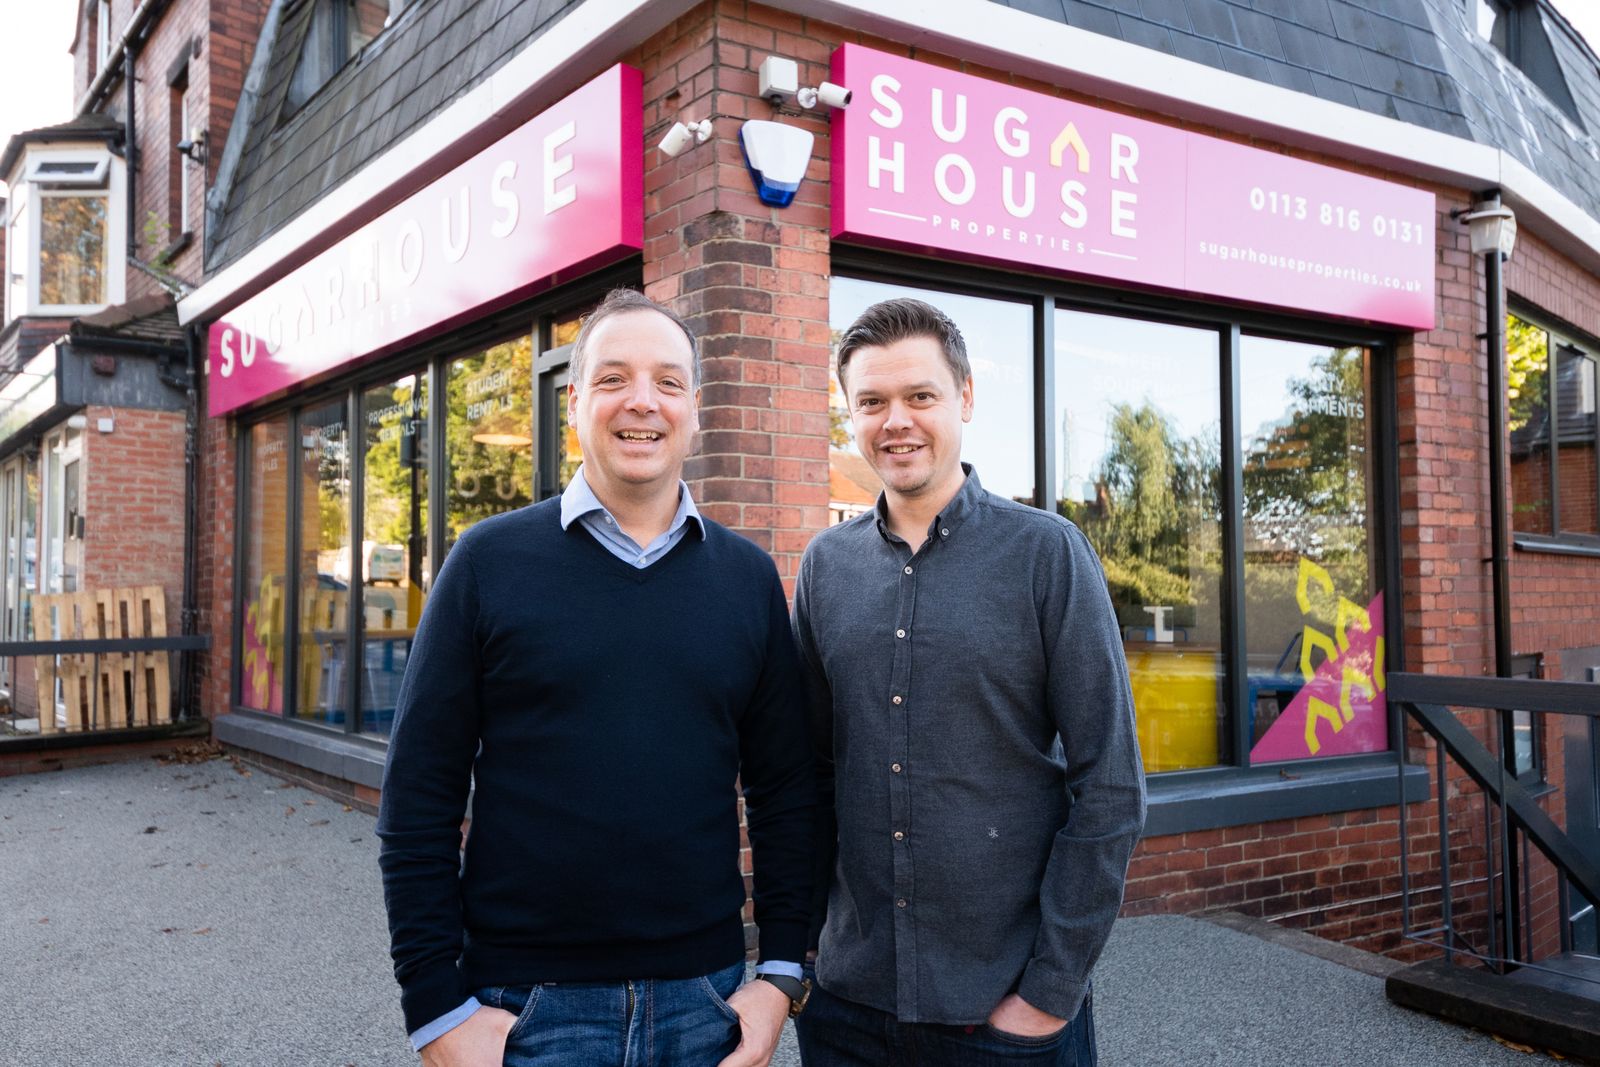 Trailblazing Leeds letting agency expands to new premises